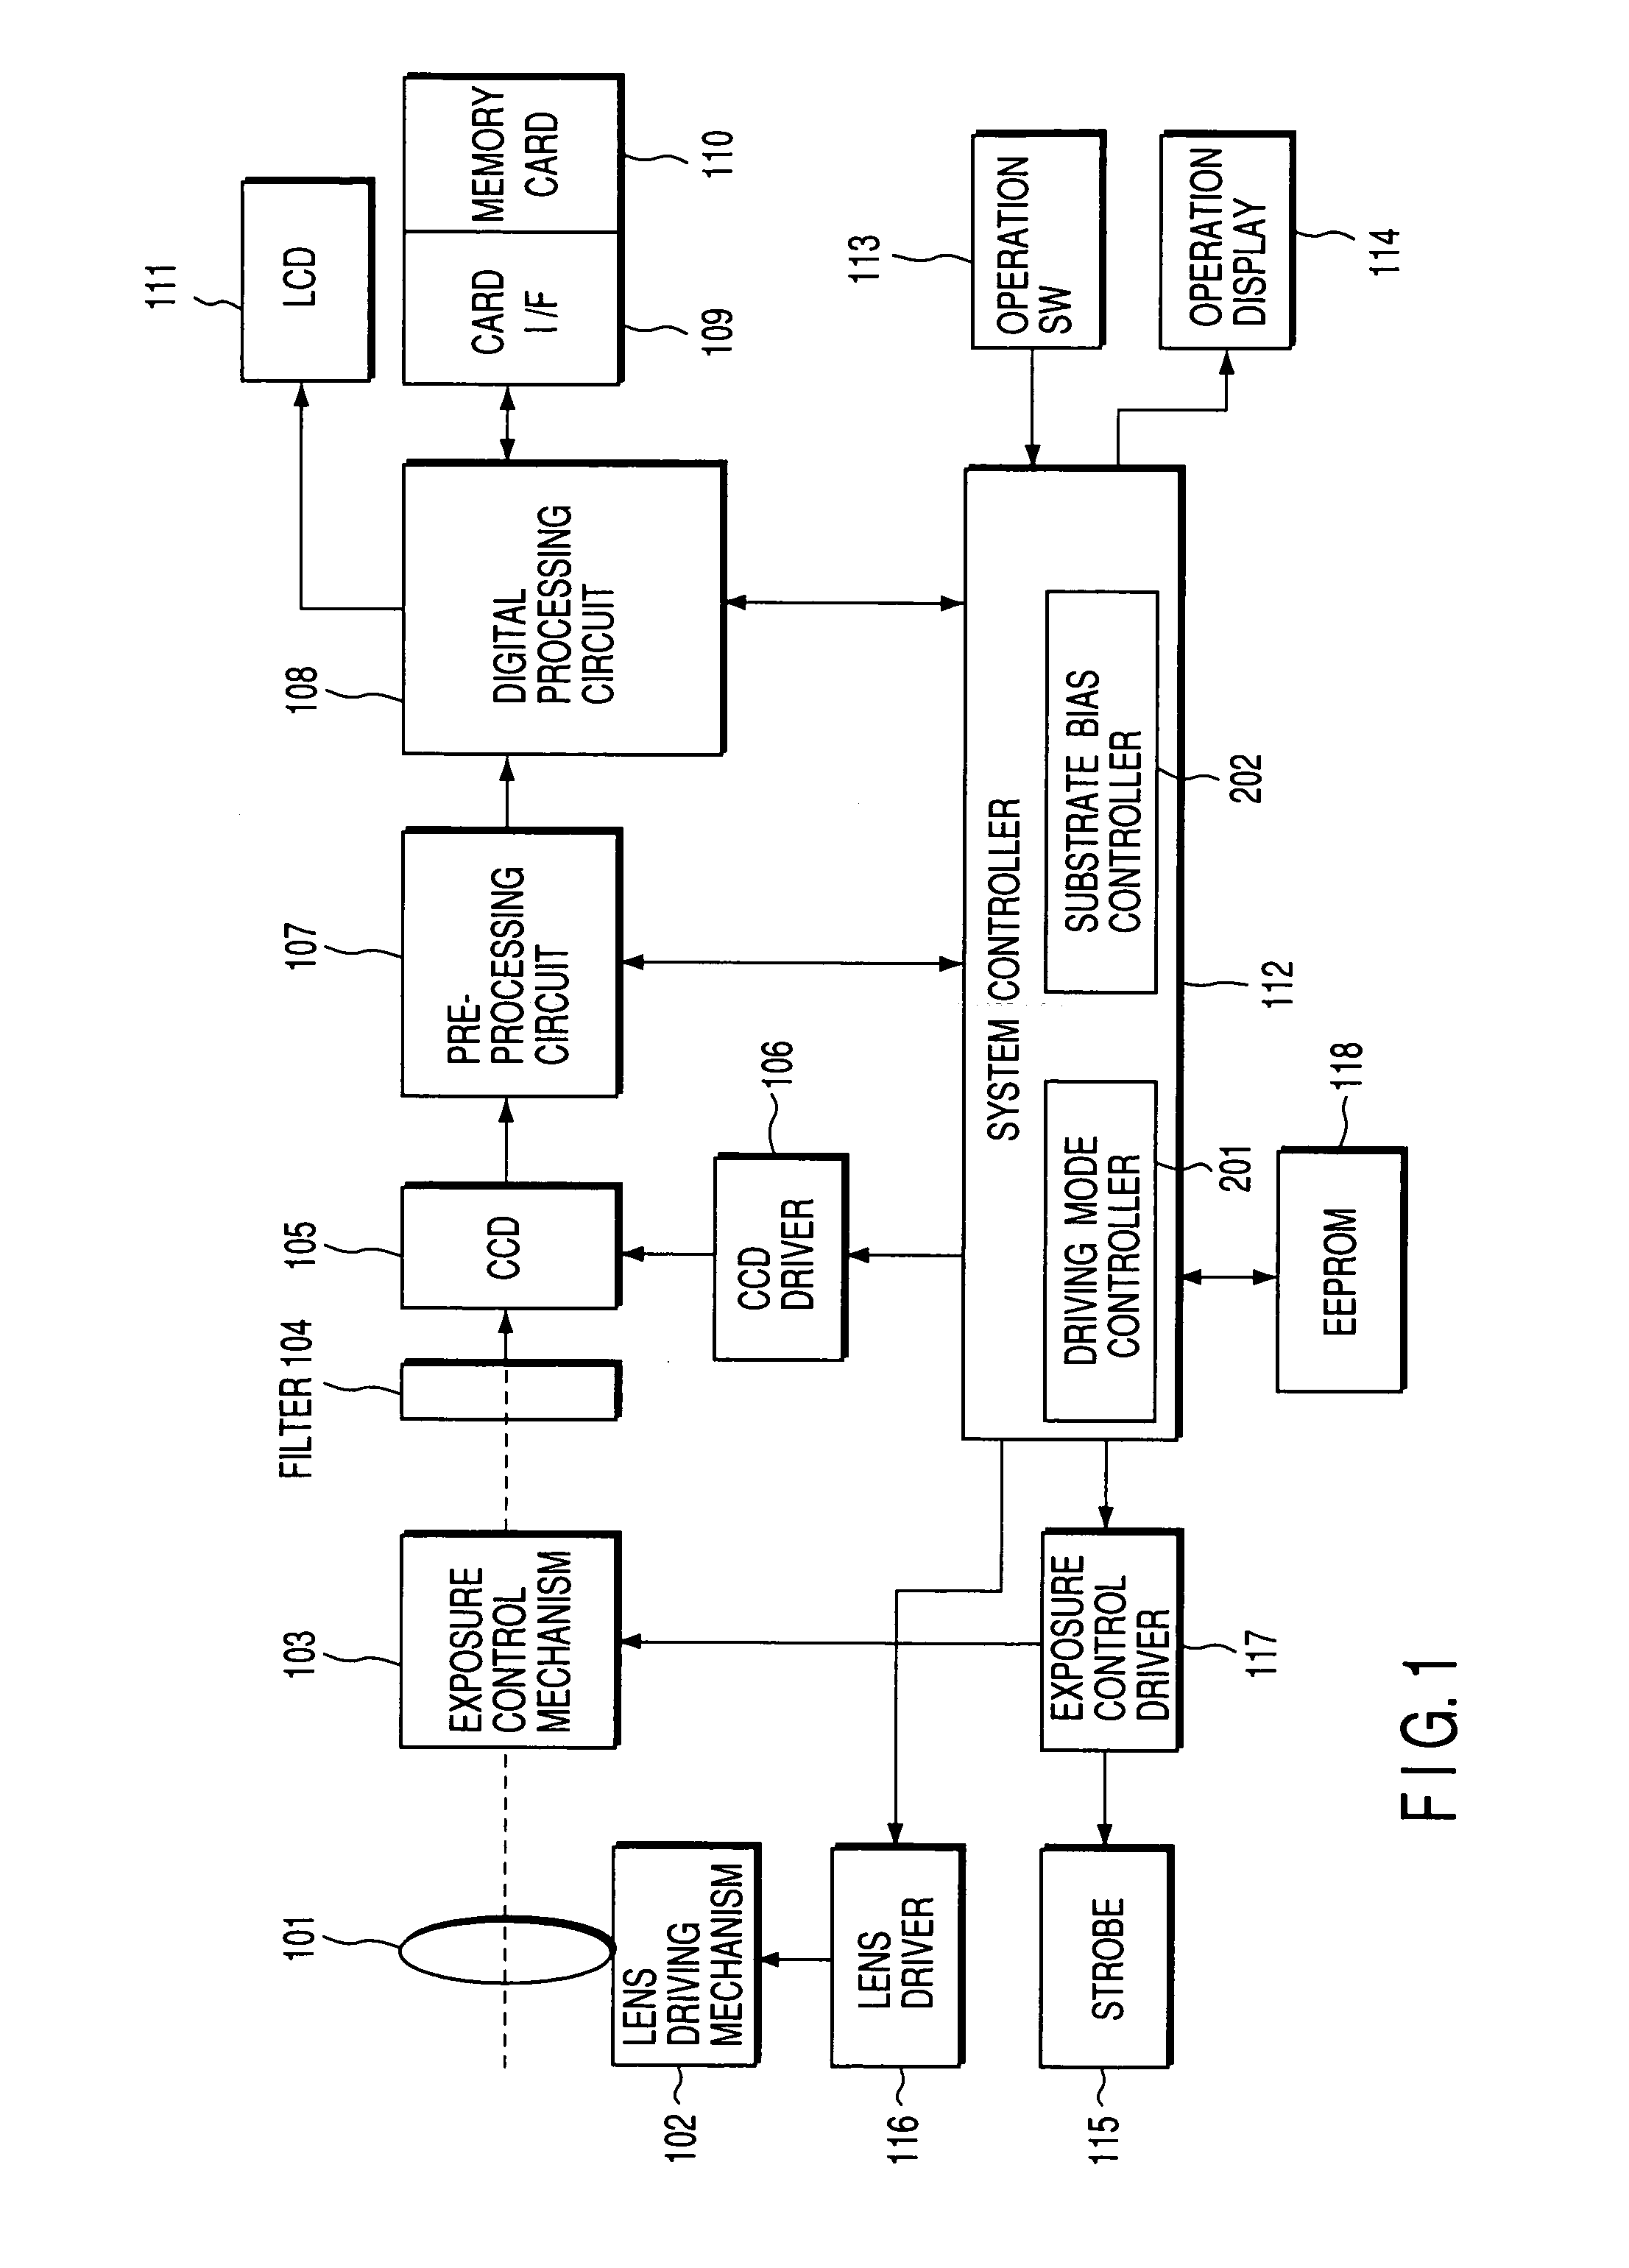 Image pickup device capable of adjusting the overflow level of the sensor based on the read out mode